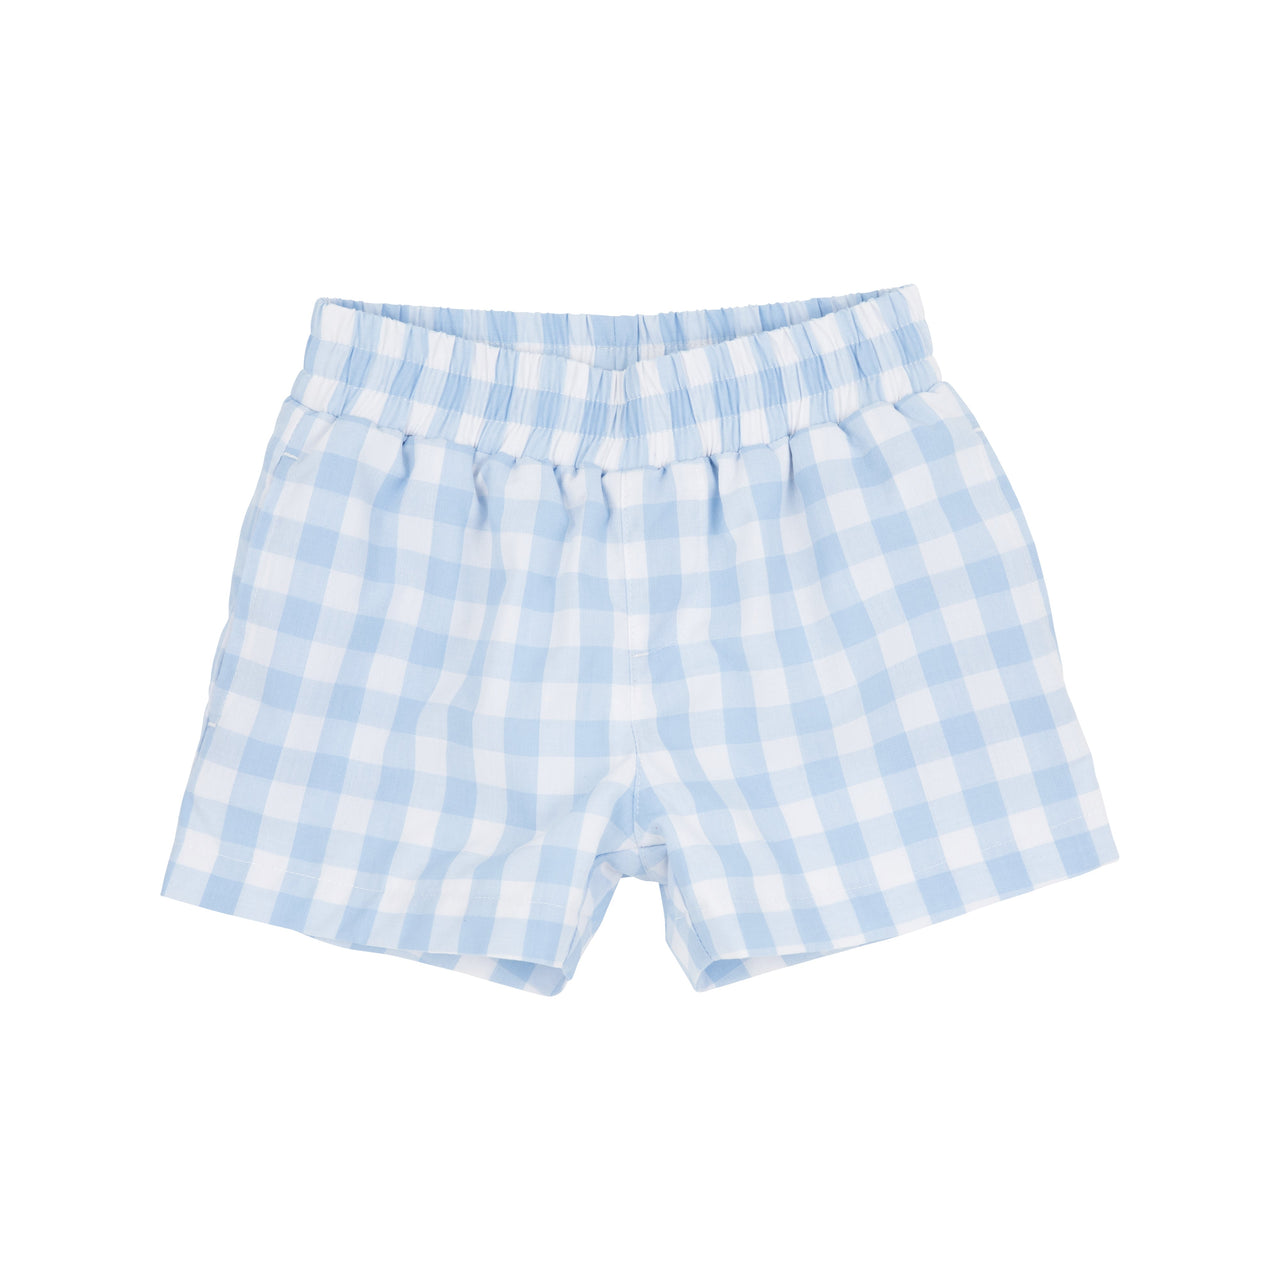 Sheffield Shorts | Beale Street Blue Check with Worth Avenue White